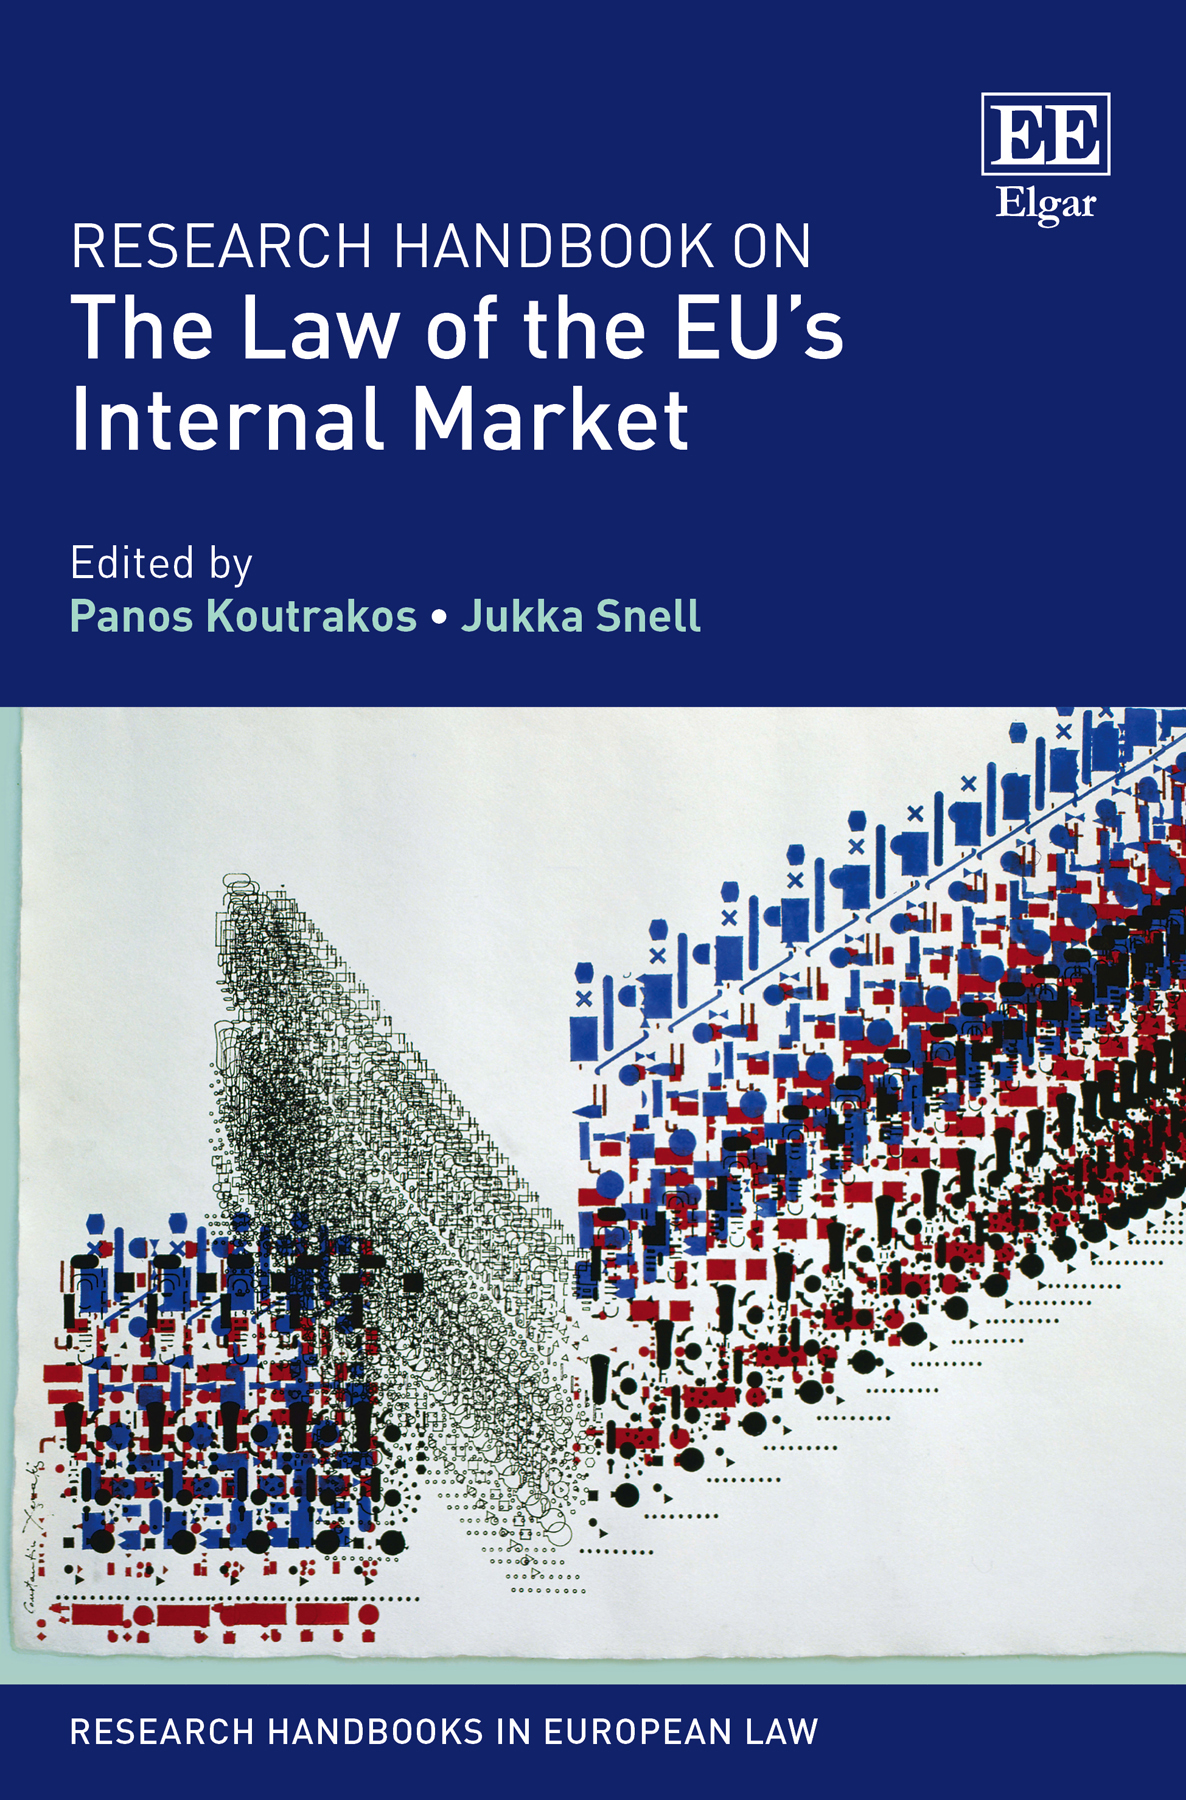 Research Handbook on the Law of the EU's Internal Market